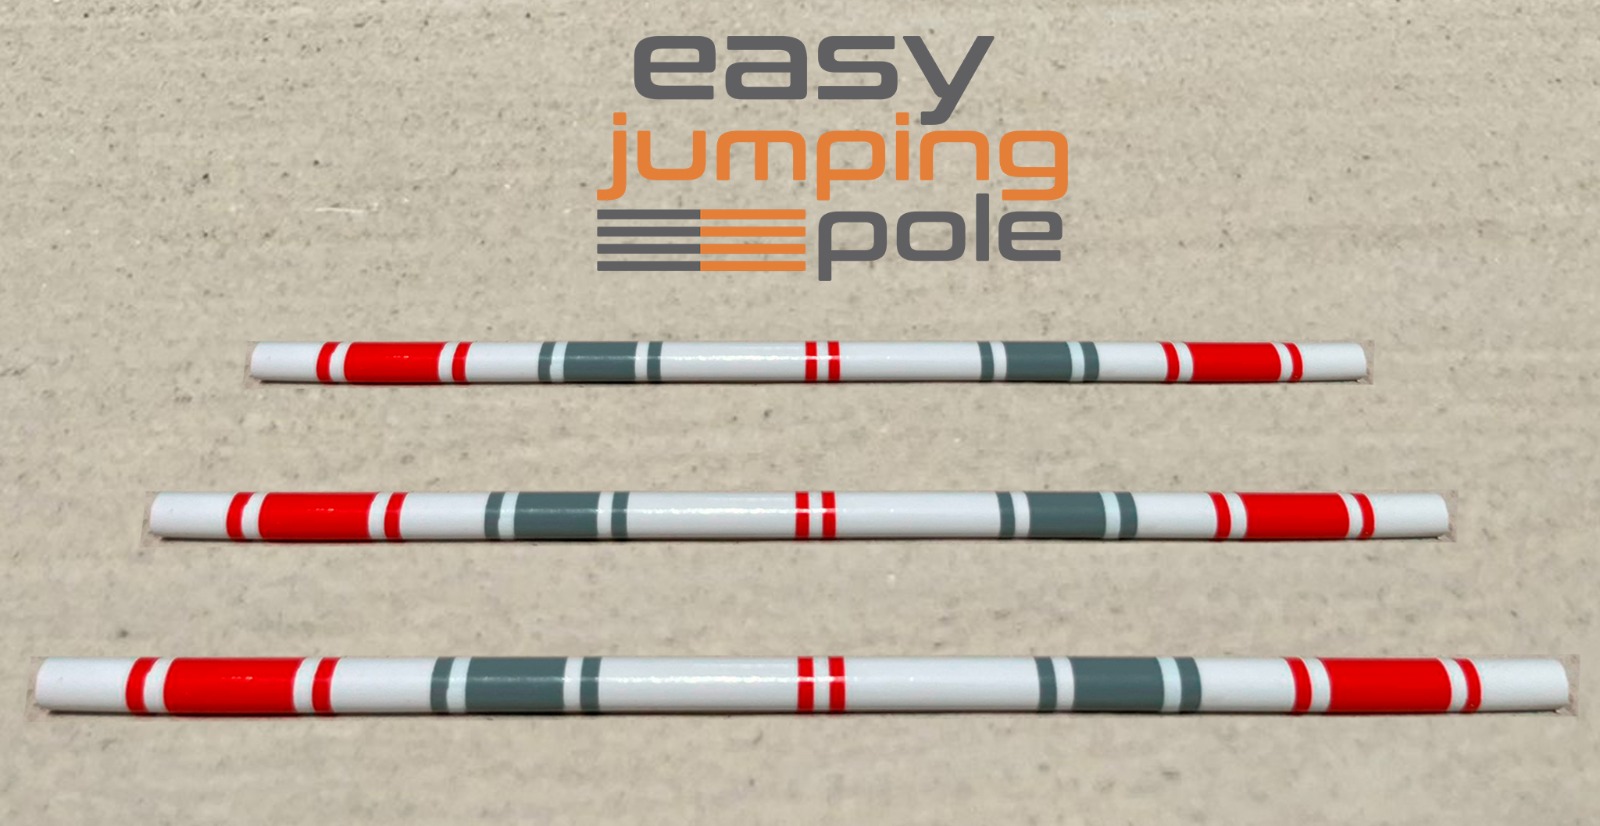 Easy jumping pole Model A-1